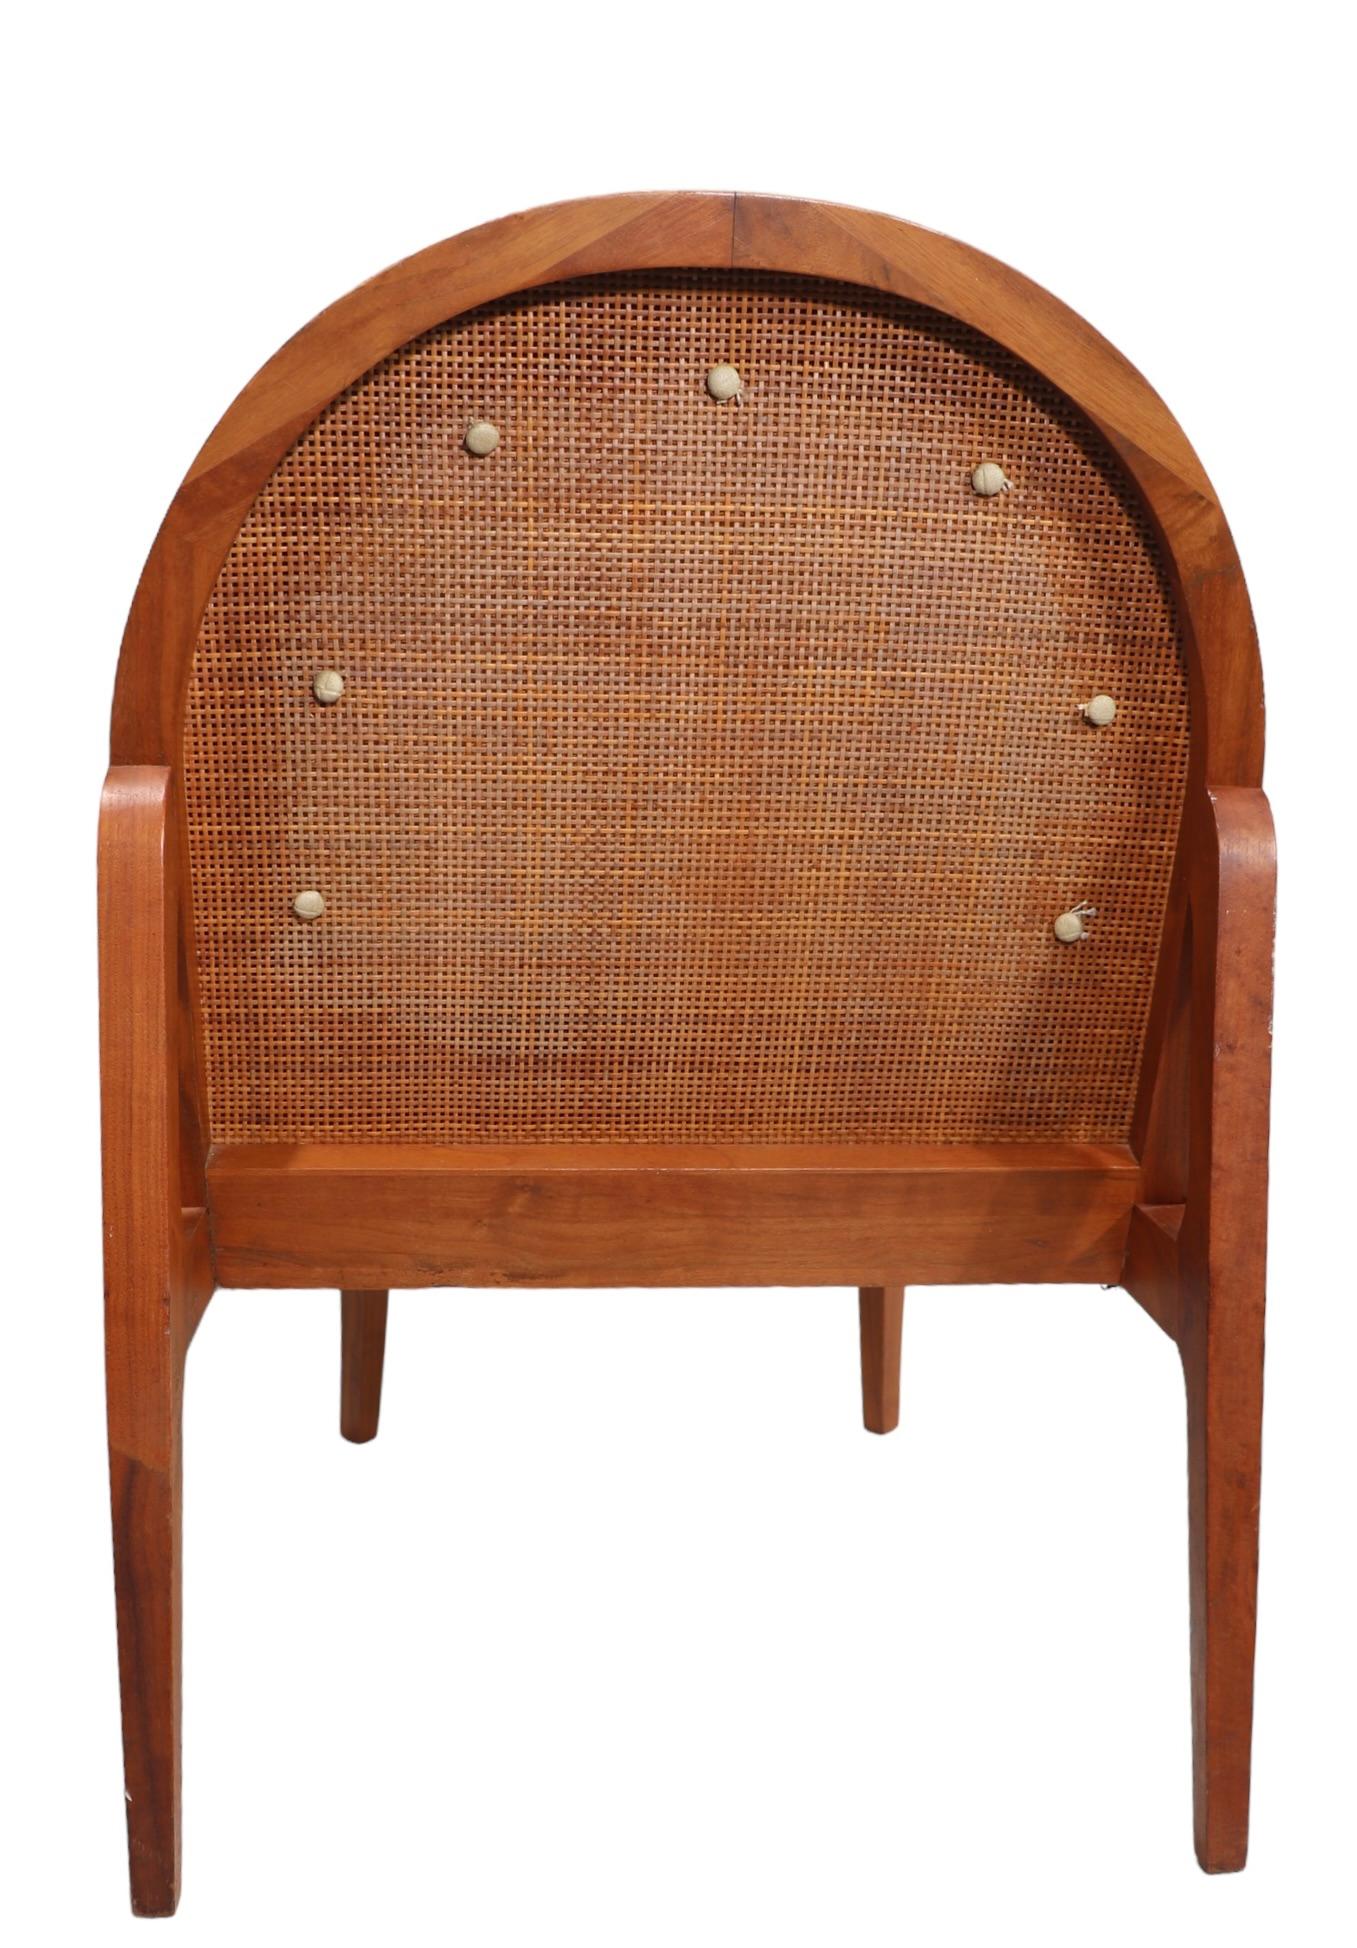 Exceptional sophisticated Mid Century lounge chair in very good, clean, original, ready to use condition. The chair features a caned back which  supports the upholstered vinyl cushion, a walnut frame with an exposed architectural form structure.